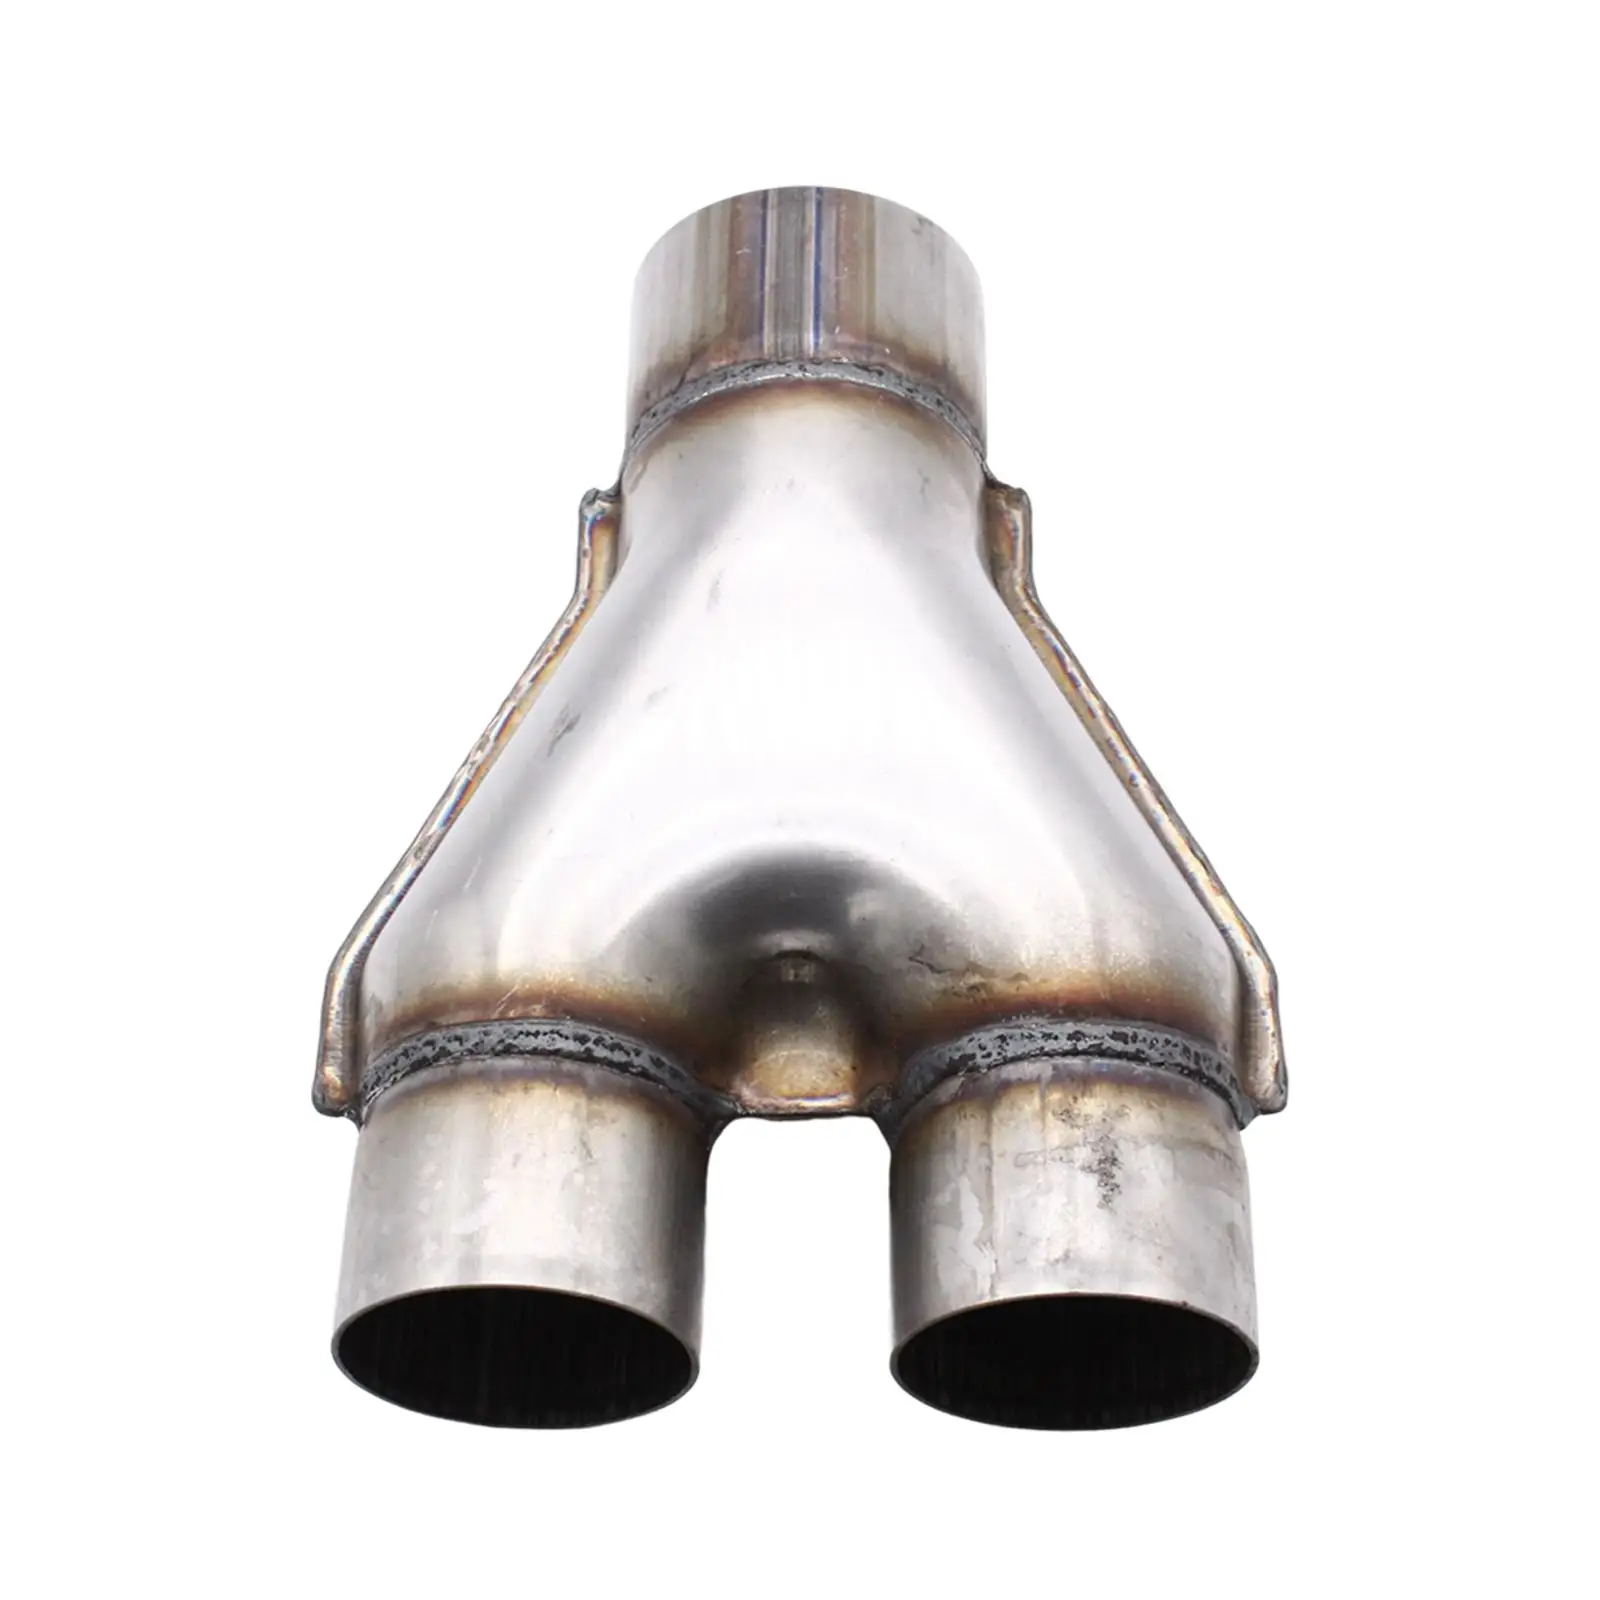 3inch Single to 2 1/2inch Dual Exhaust Adapter Y Pipe Easily Assemble Sturdy Accessory Length 10